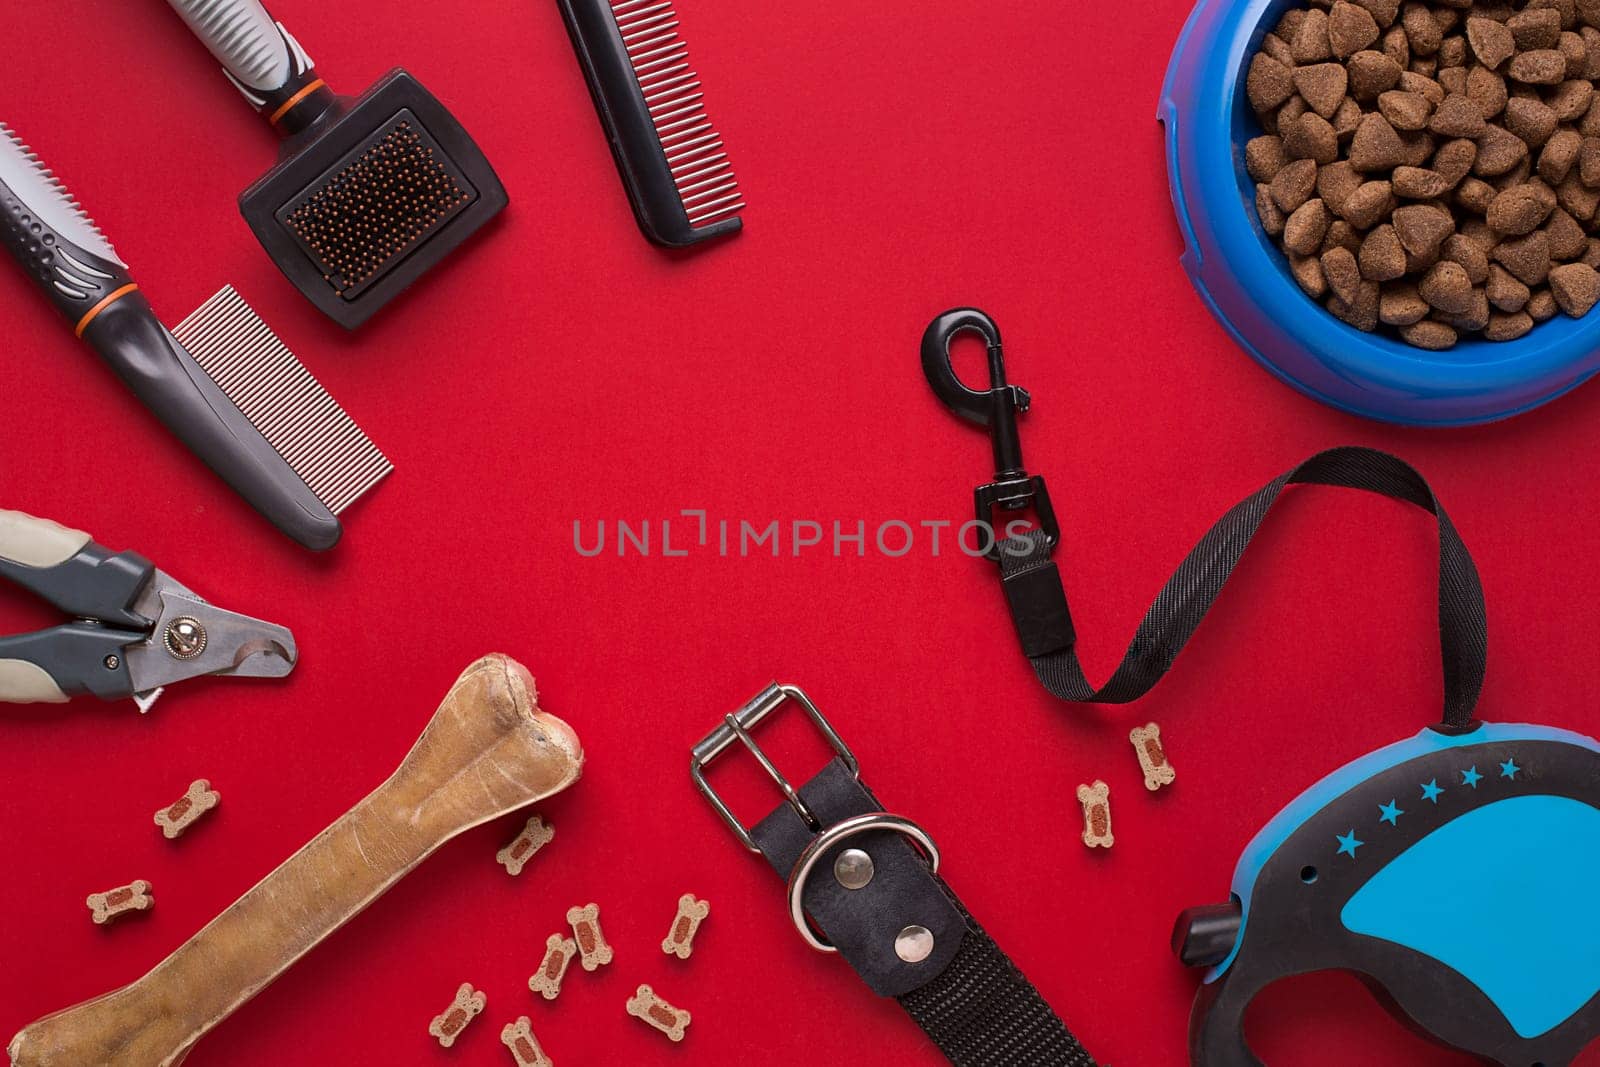 Collar, bowl with feed, leash, delicacy, combs and brushes for dogs. Isolated on red background. Top view. Still life. Copy space